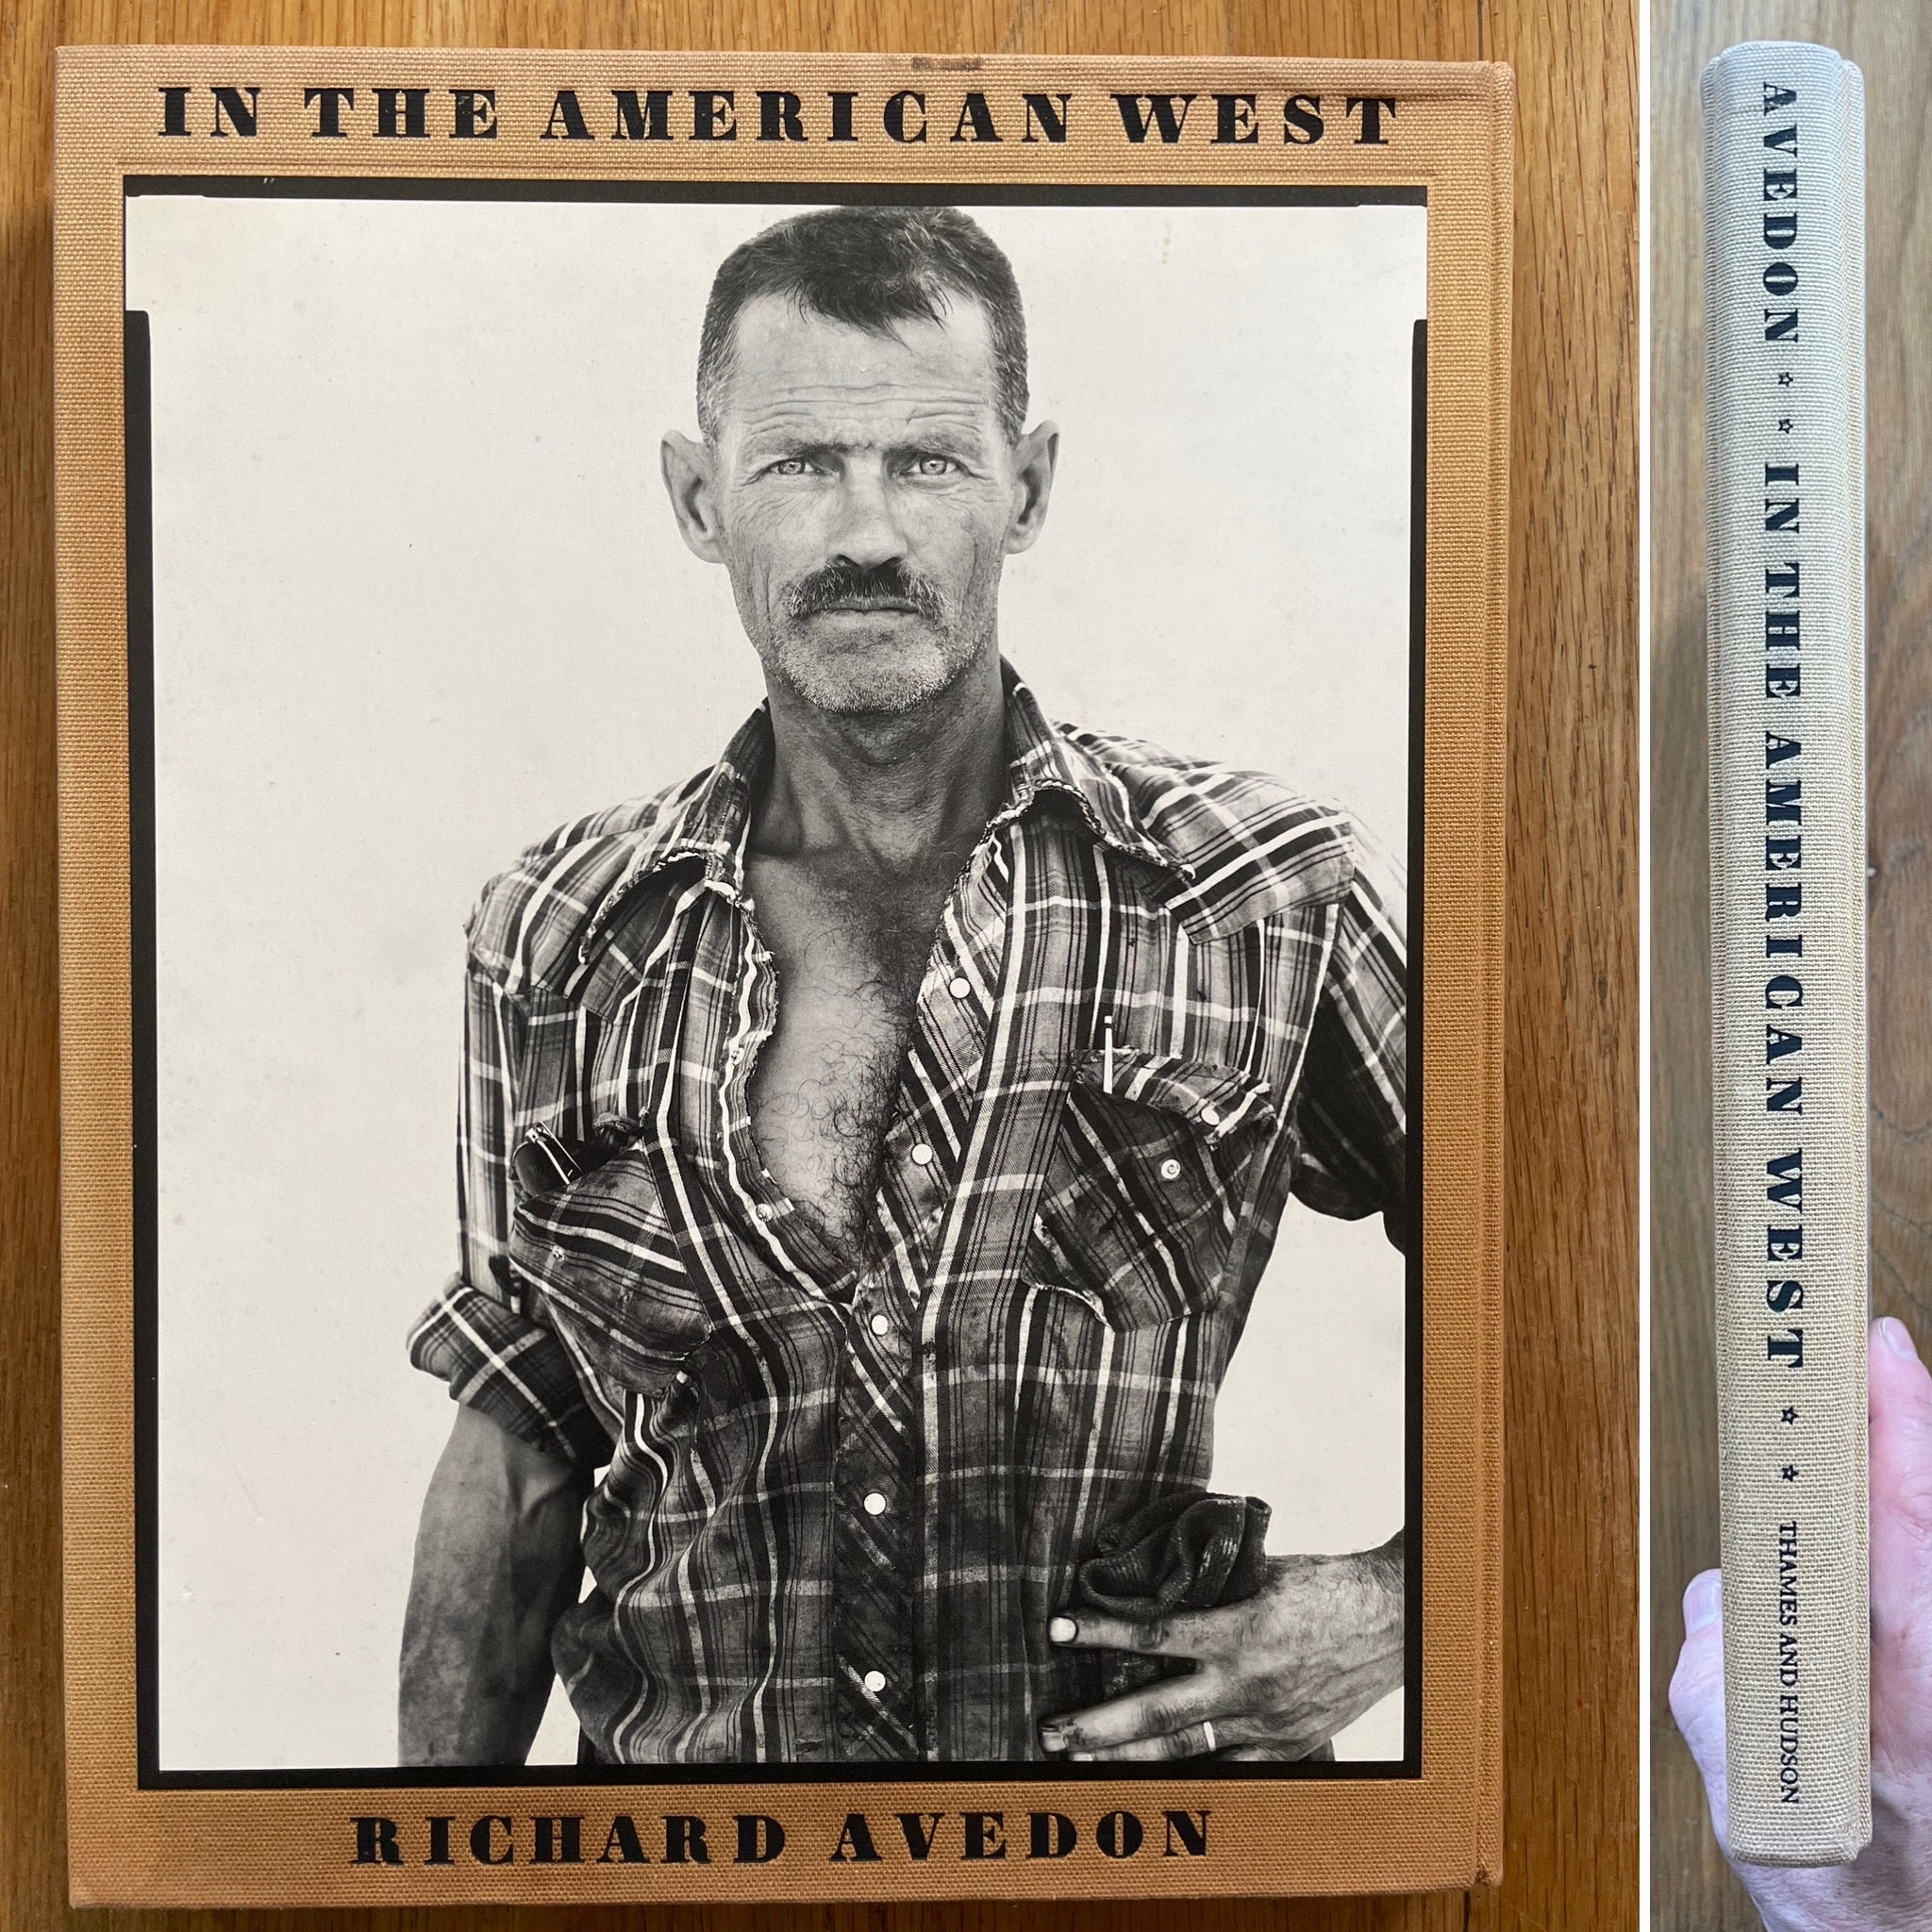 Buy In the American West by Richard Avedon photography book 